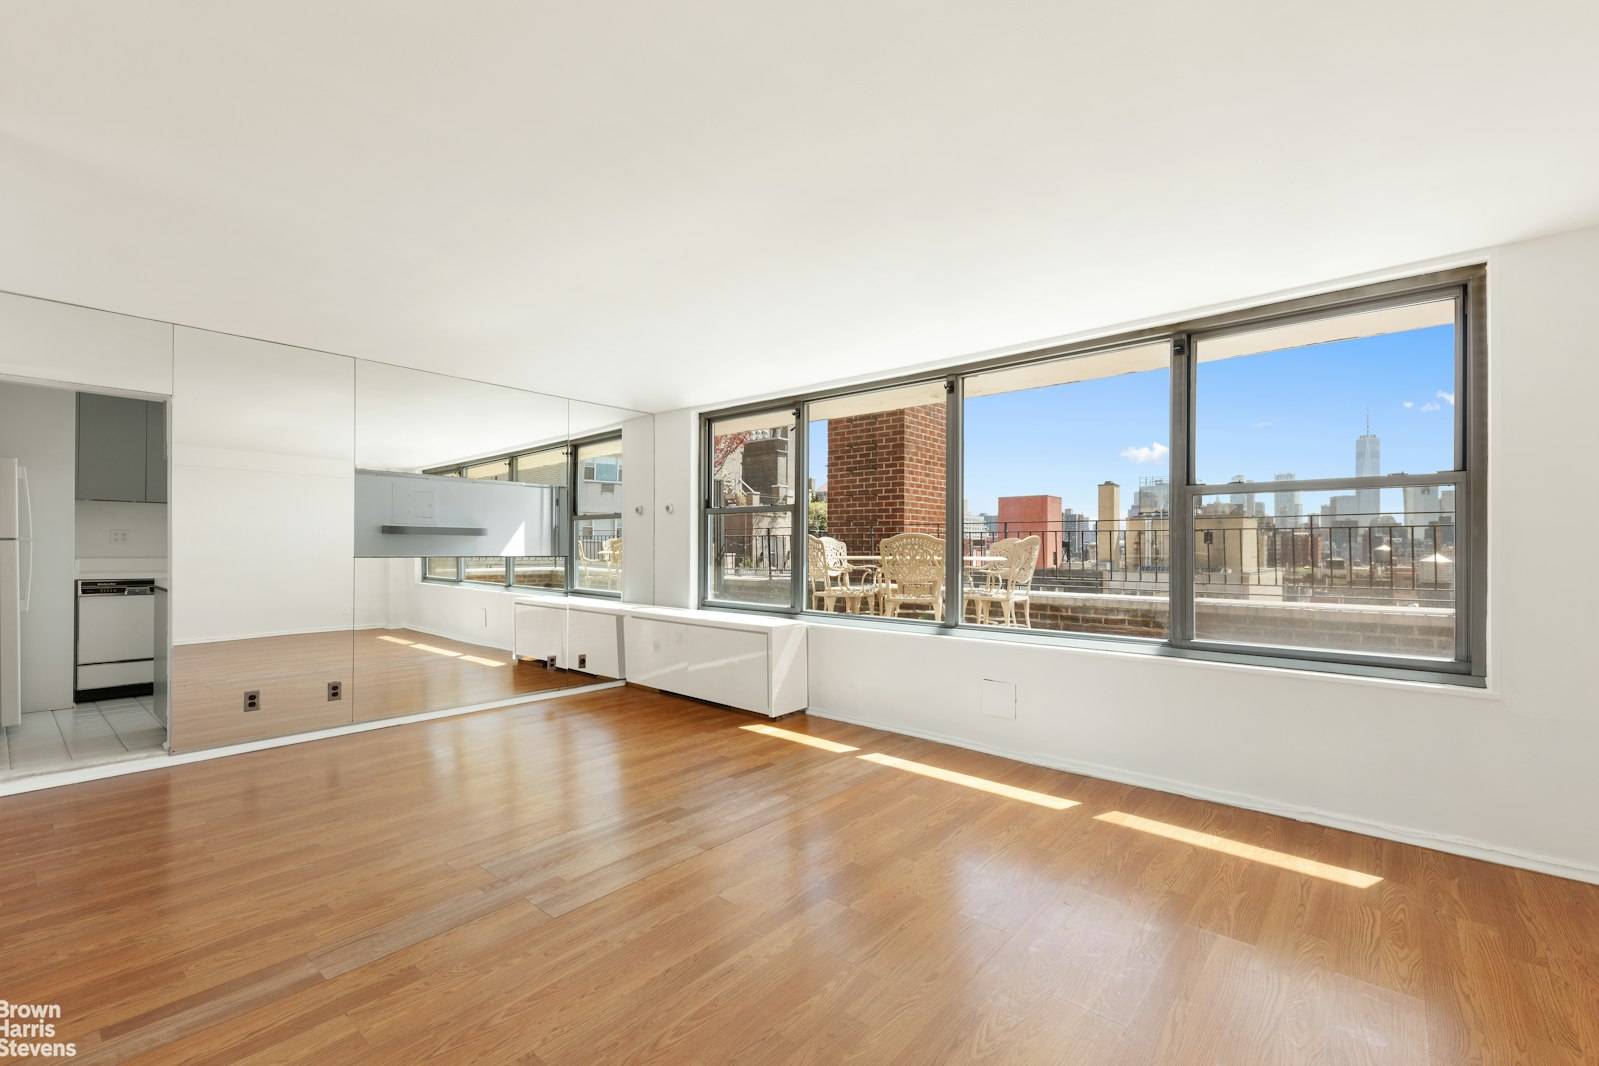 Bring your architect and creative design vision to this rare, sun drenched, high floor corner penthouse located in a full service 24 hour doorman condominium in prime Greenwich Village.